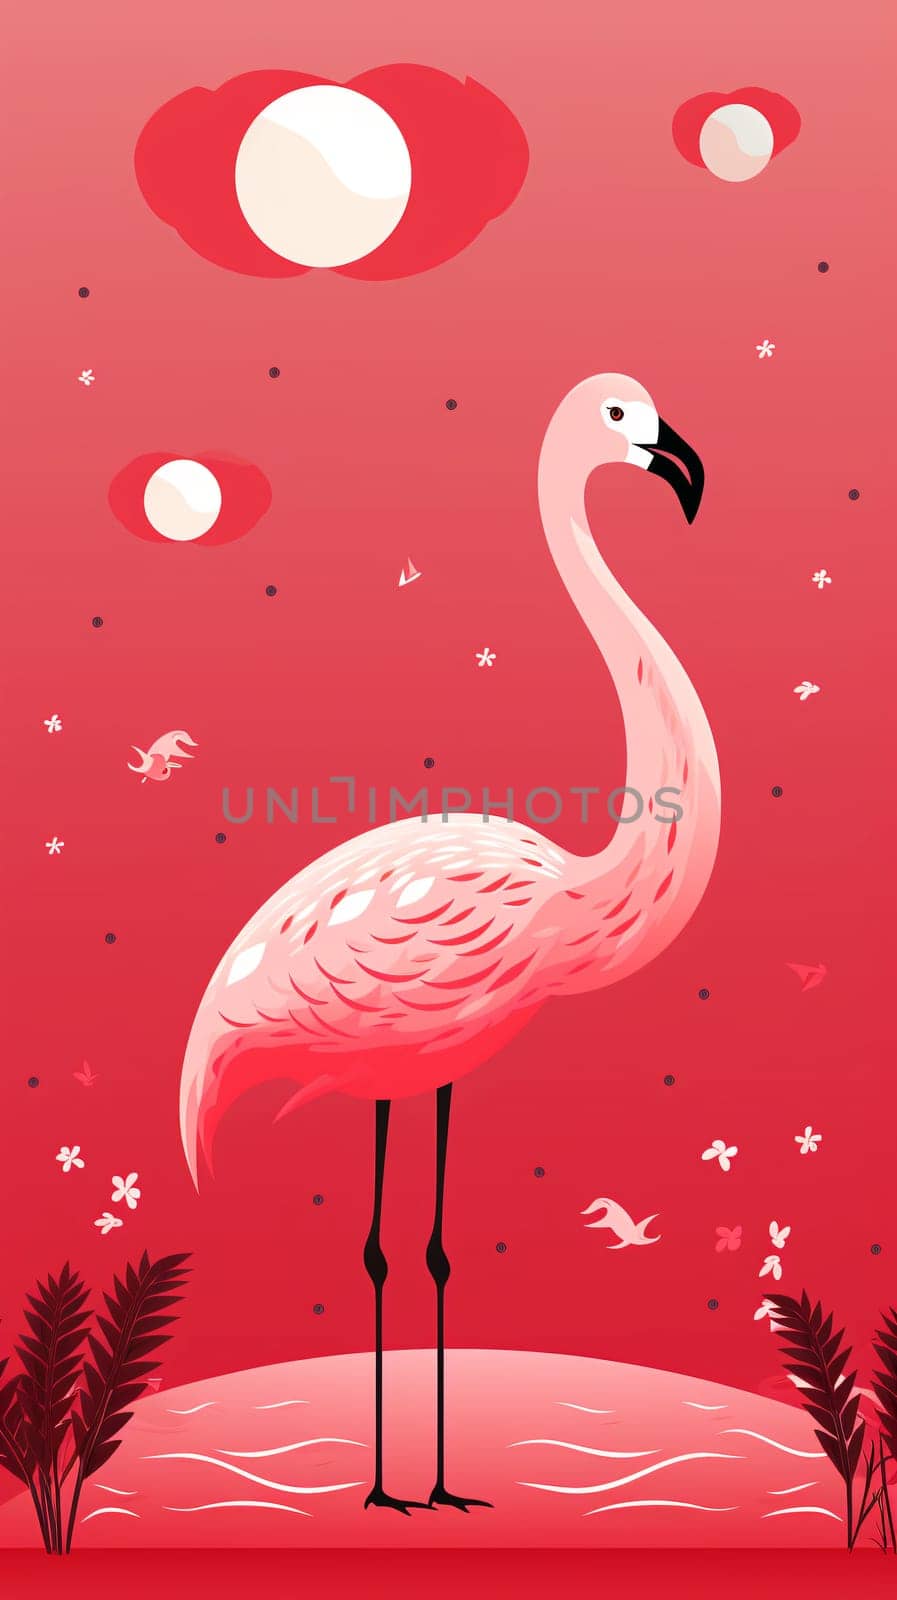 A pink flamingo stands amid a whimsical red landscape with abstract clouds and playful fauna